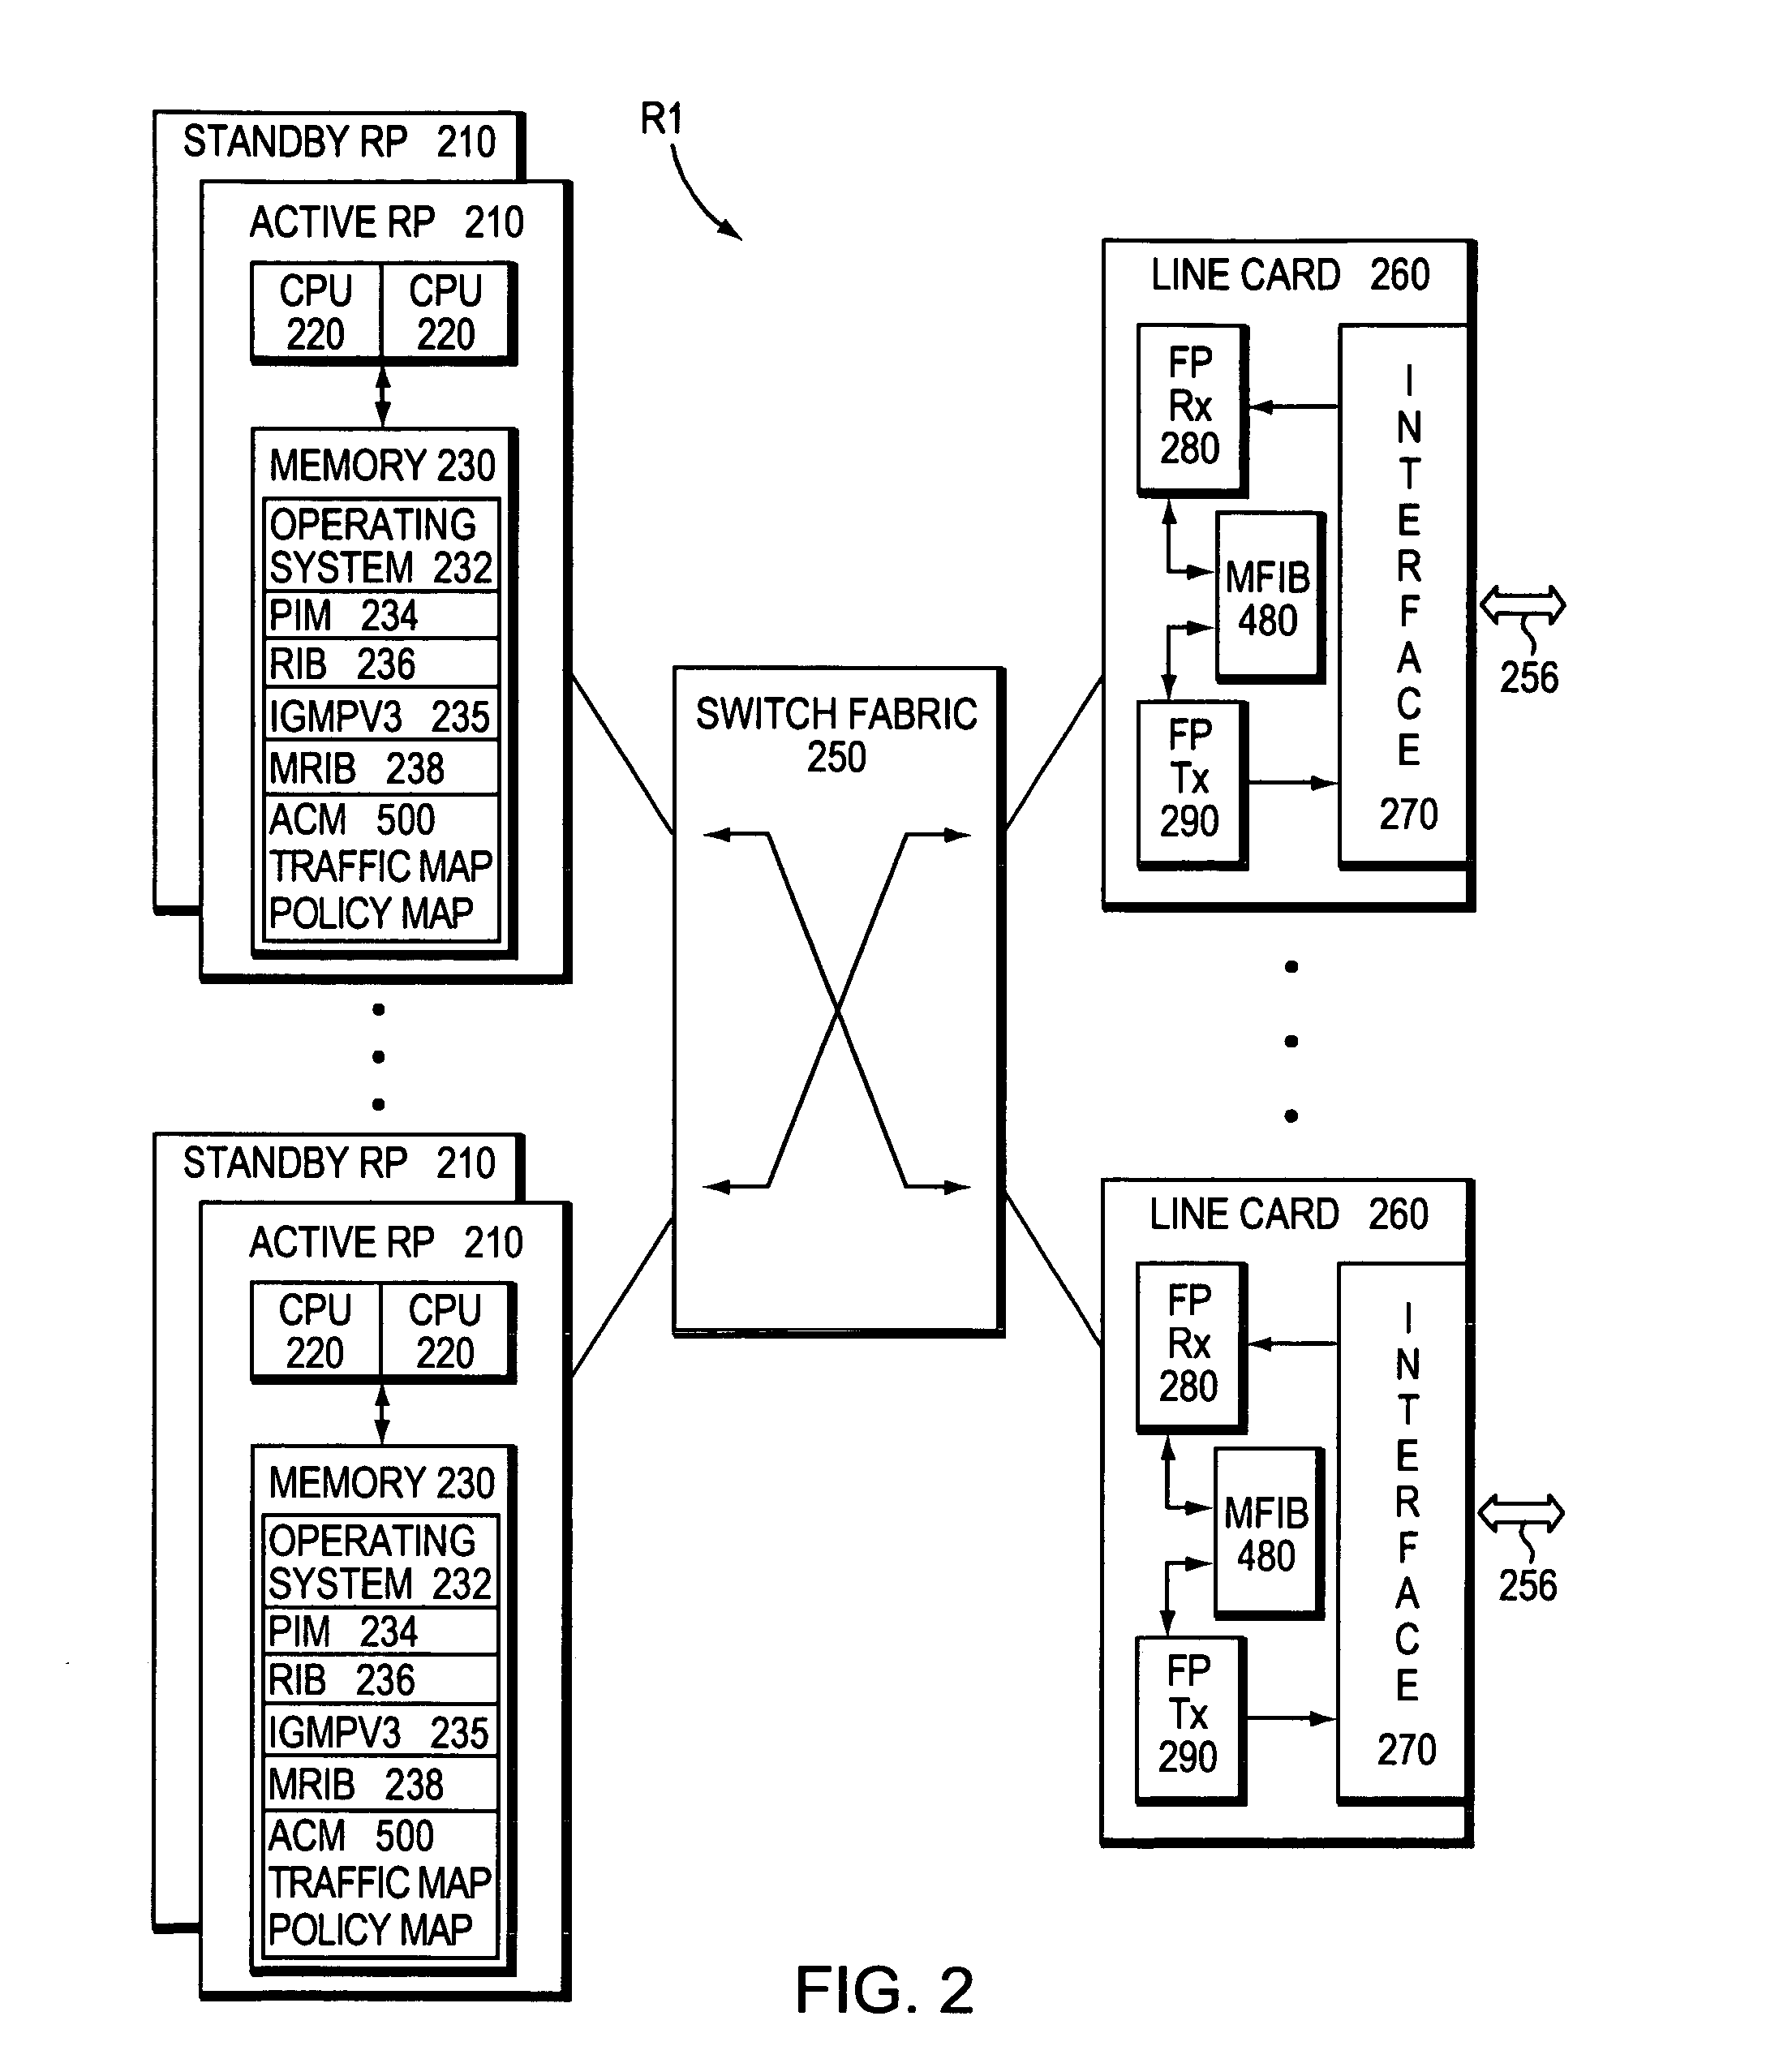 Admission control mechanism for multicast receivers